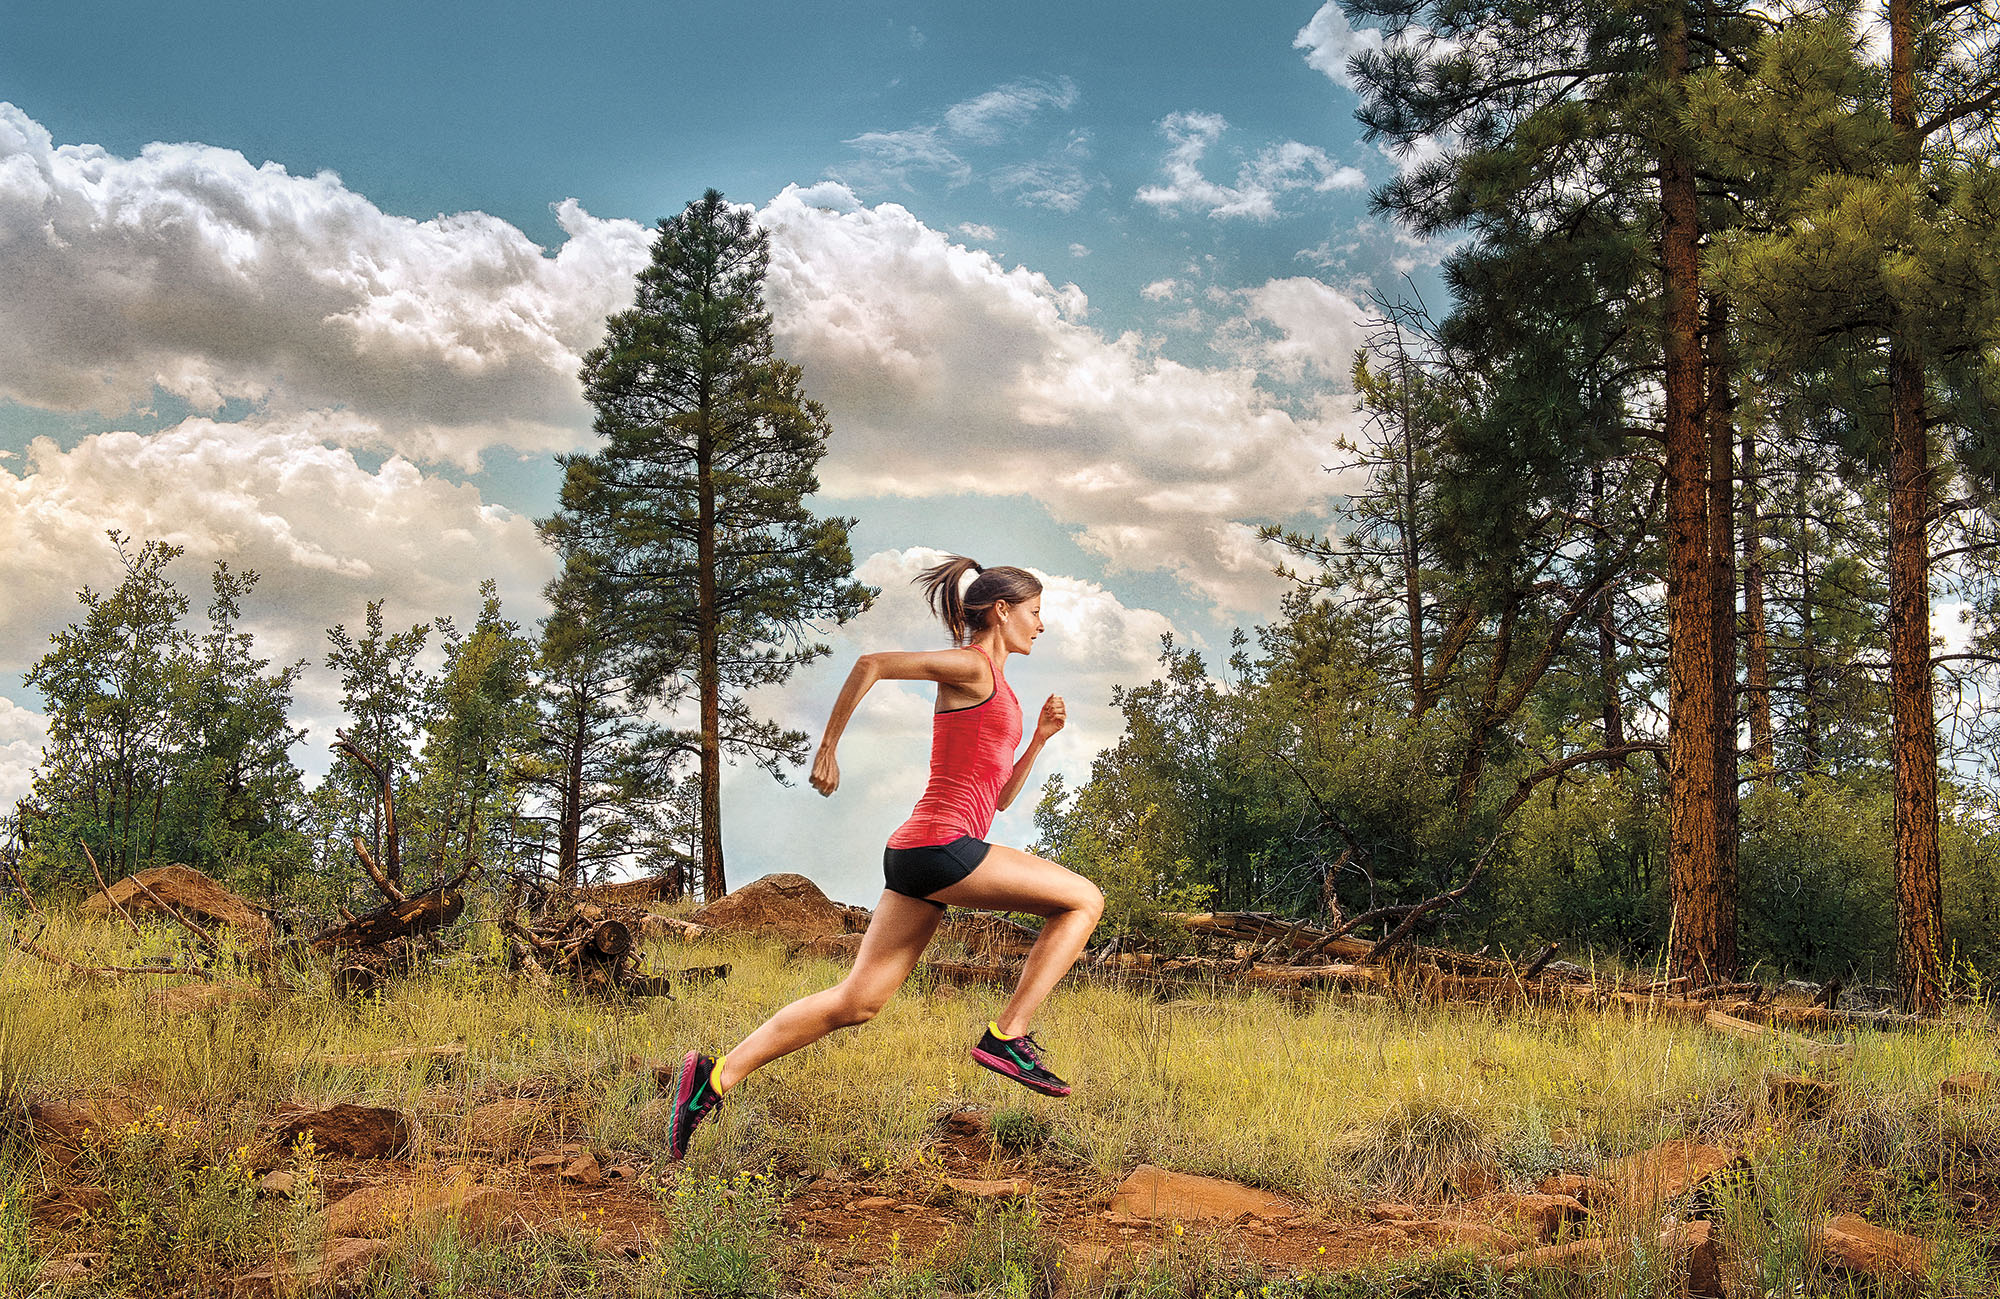 Outdoor Runner photographed by Sports Photographer Blair Bunting in Flagstaff, Arizona